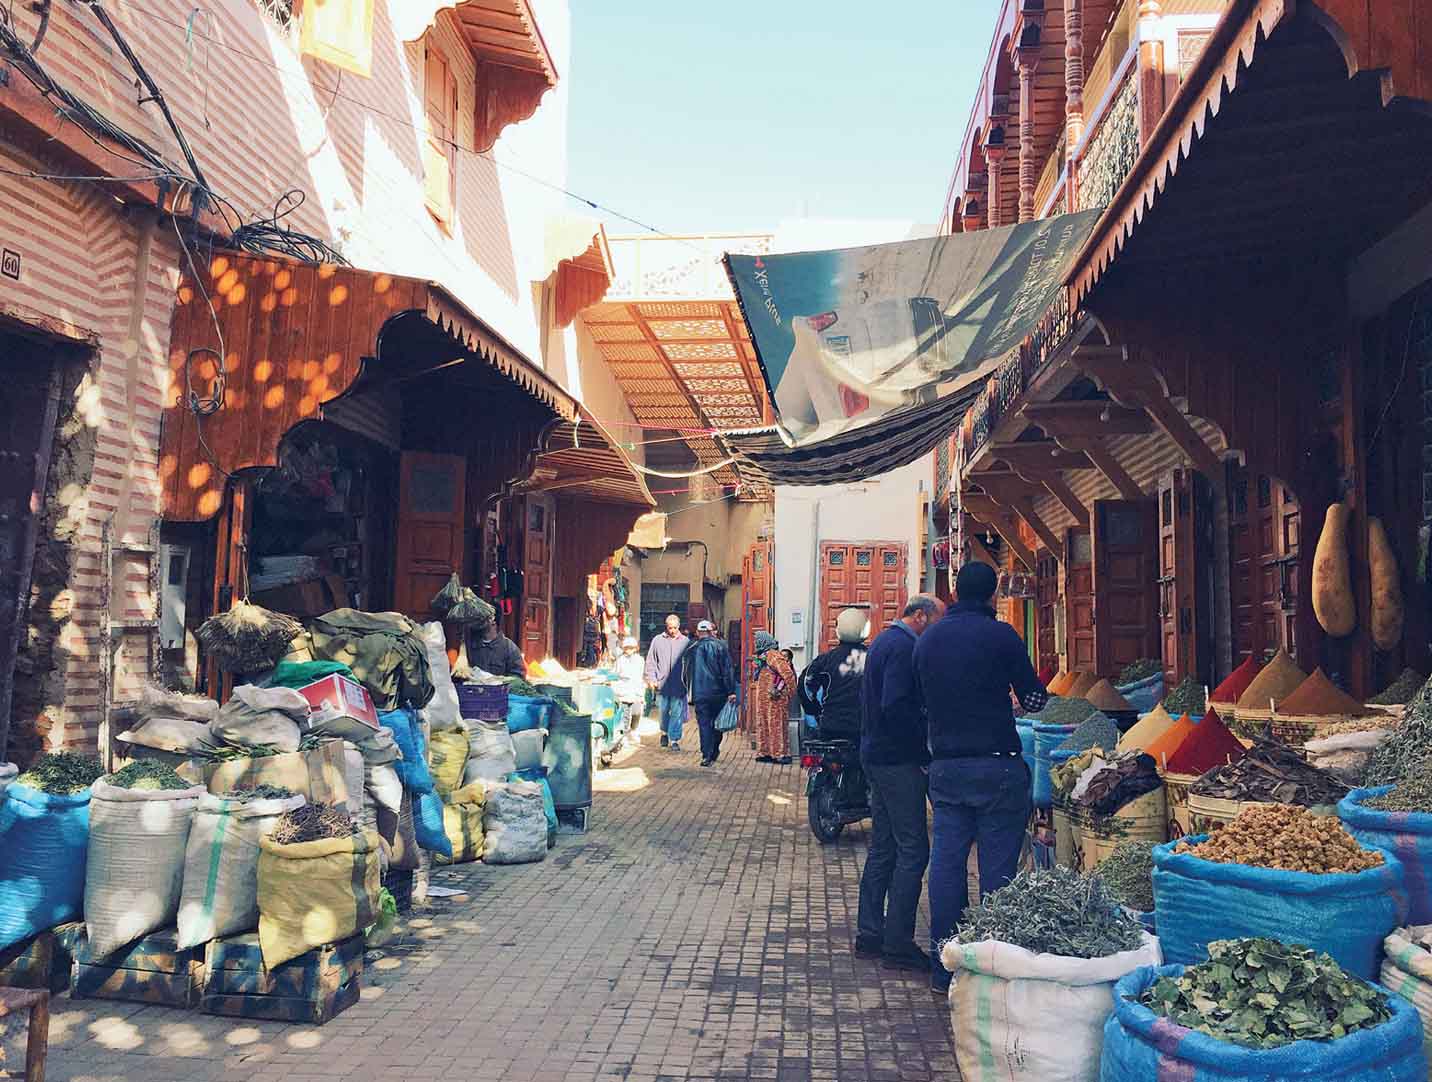 amidst-urban-edges-inside-out-appropriations-old-bazaar--marrakesh-support-diverse-individual-experiences-through-same-dynamics-encounters